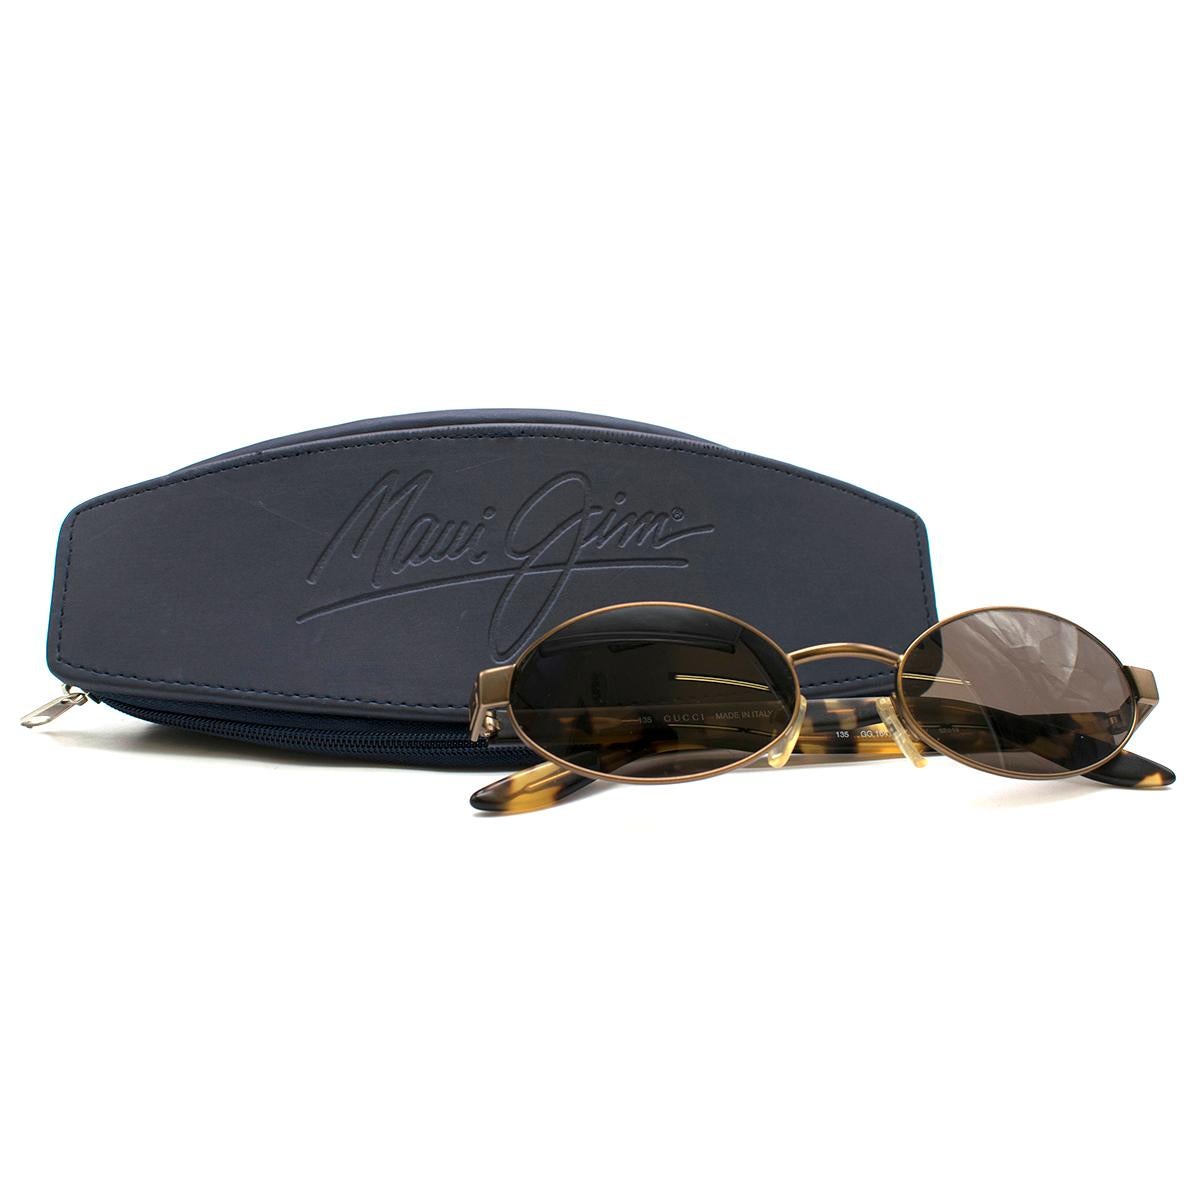  Gucci Oval Tortoise Shell Sunglasses

- Oval Tortoise Shell Sunglasses 
- Bronze-toned metal bridge and frame
- Brand initial motif on side of frame 
- UV lenses and adjustable nose pads
- This item comes with a protective case and cleaning cloth.